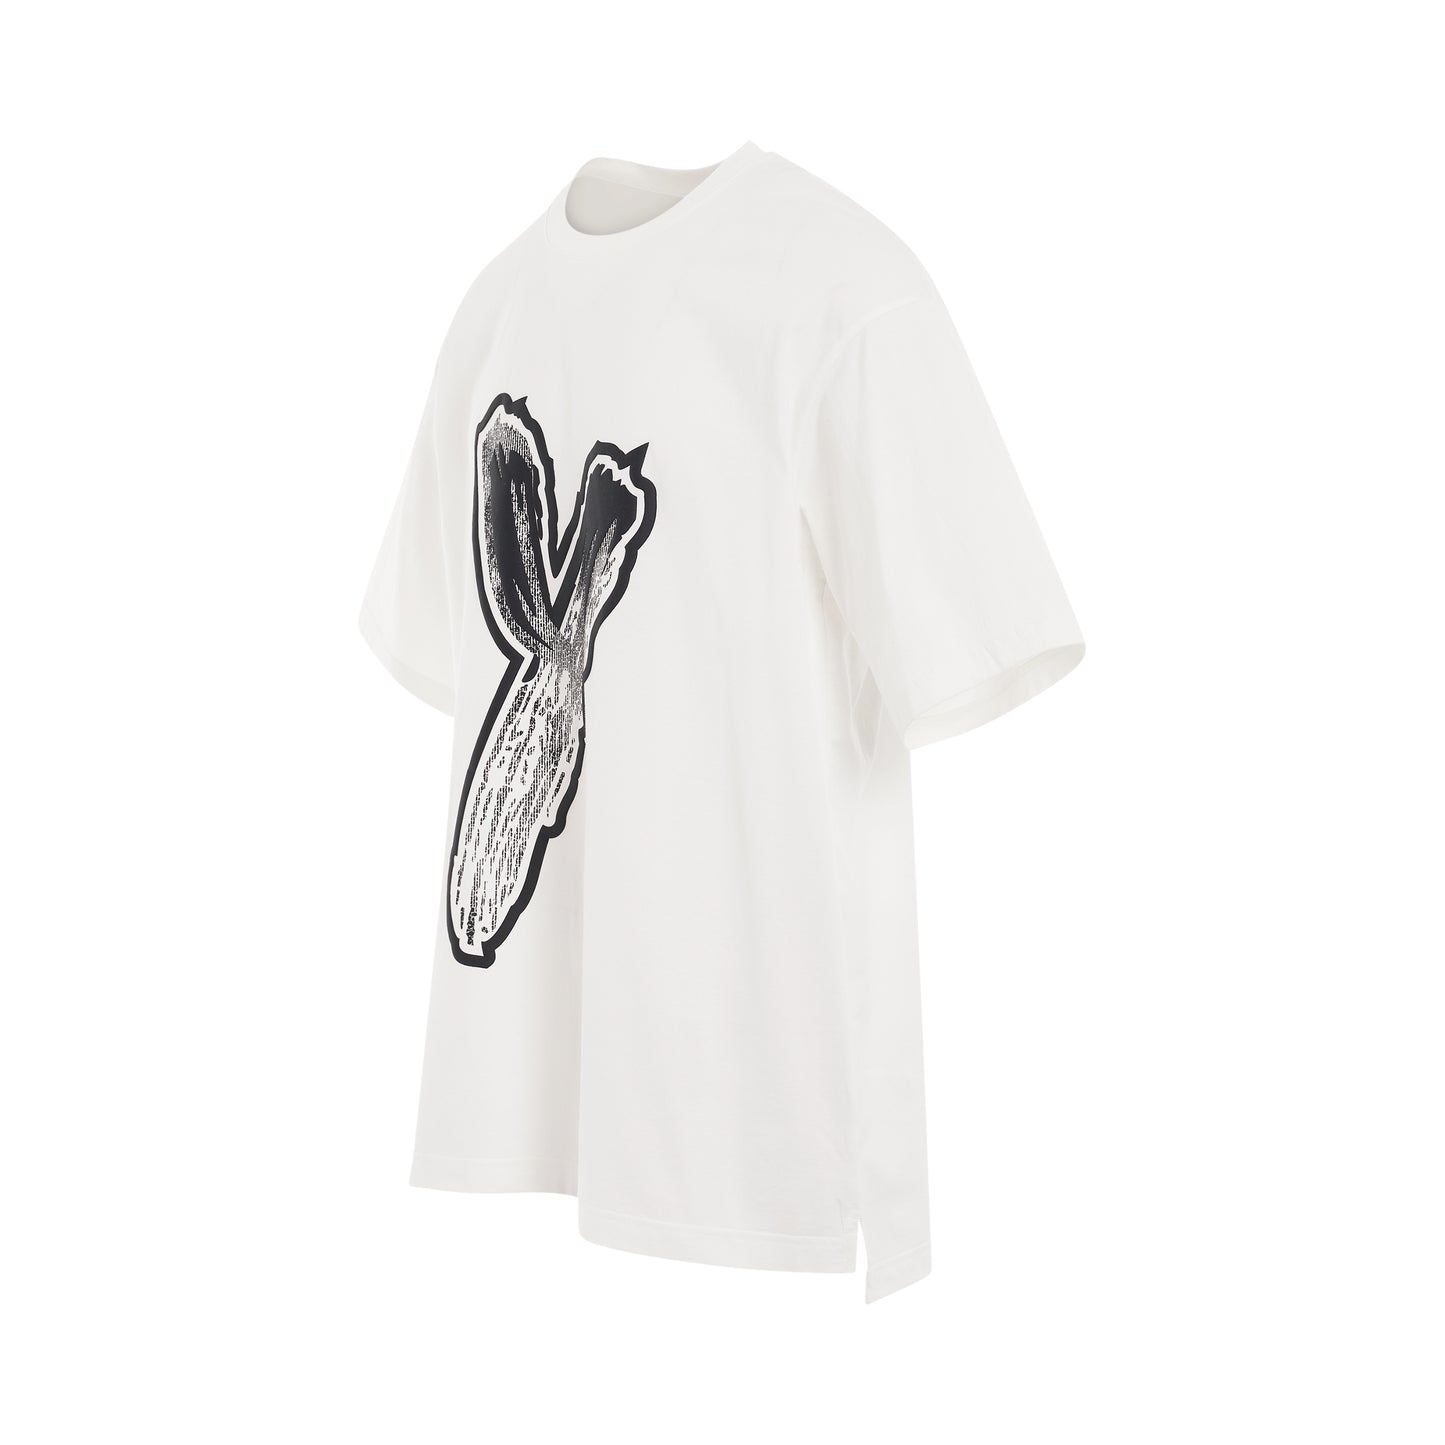 Graphic Logo T-Shirt in Off White